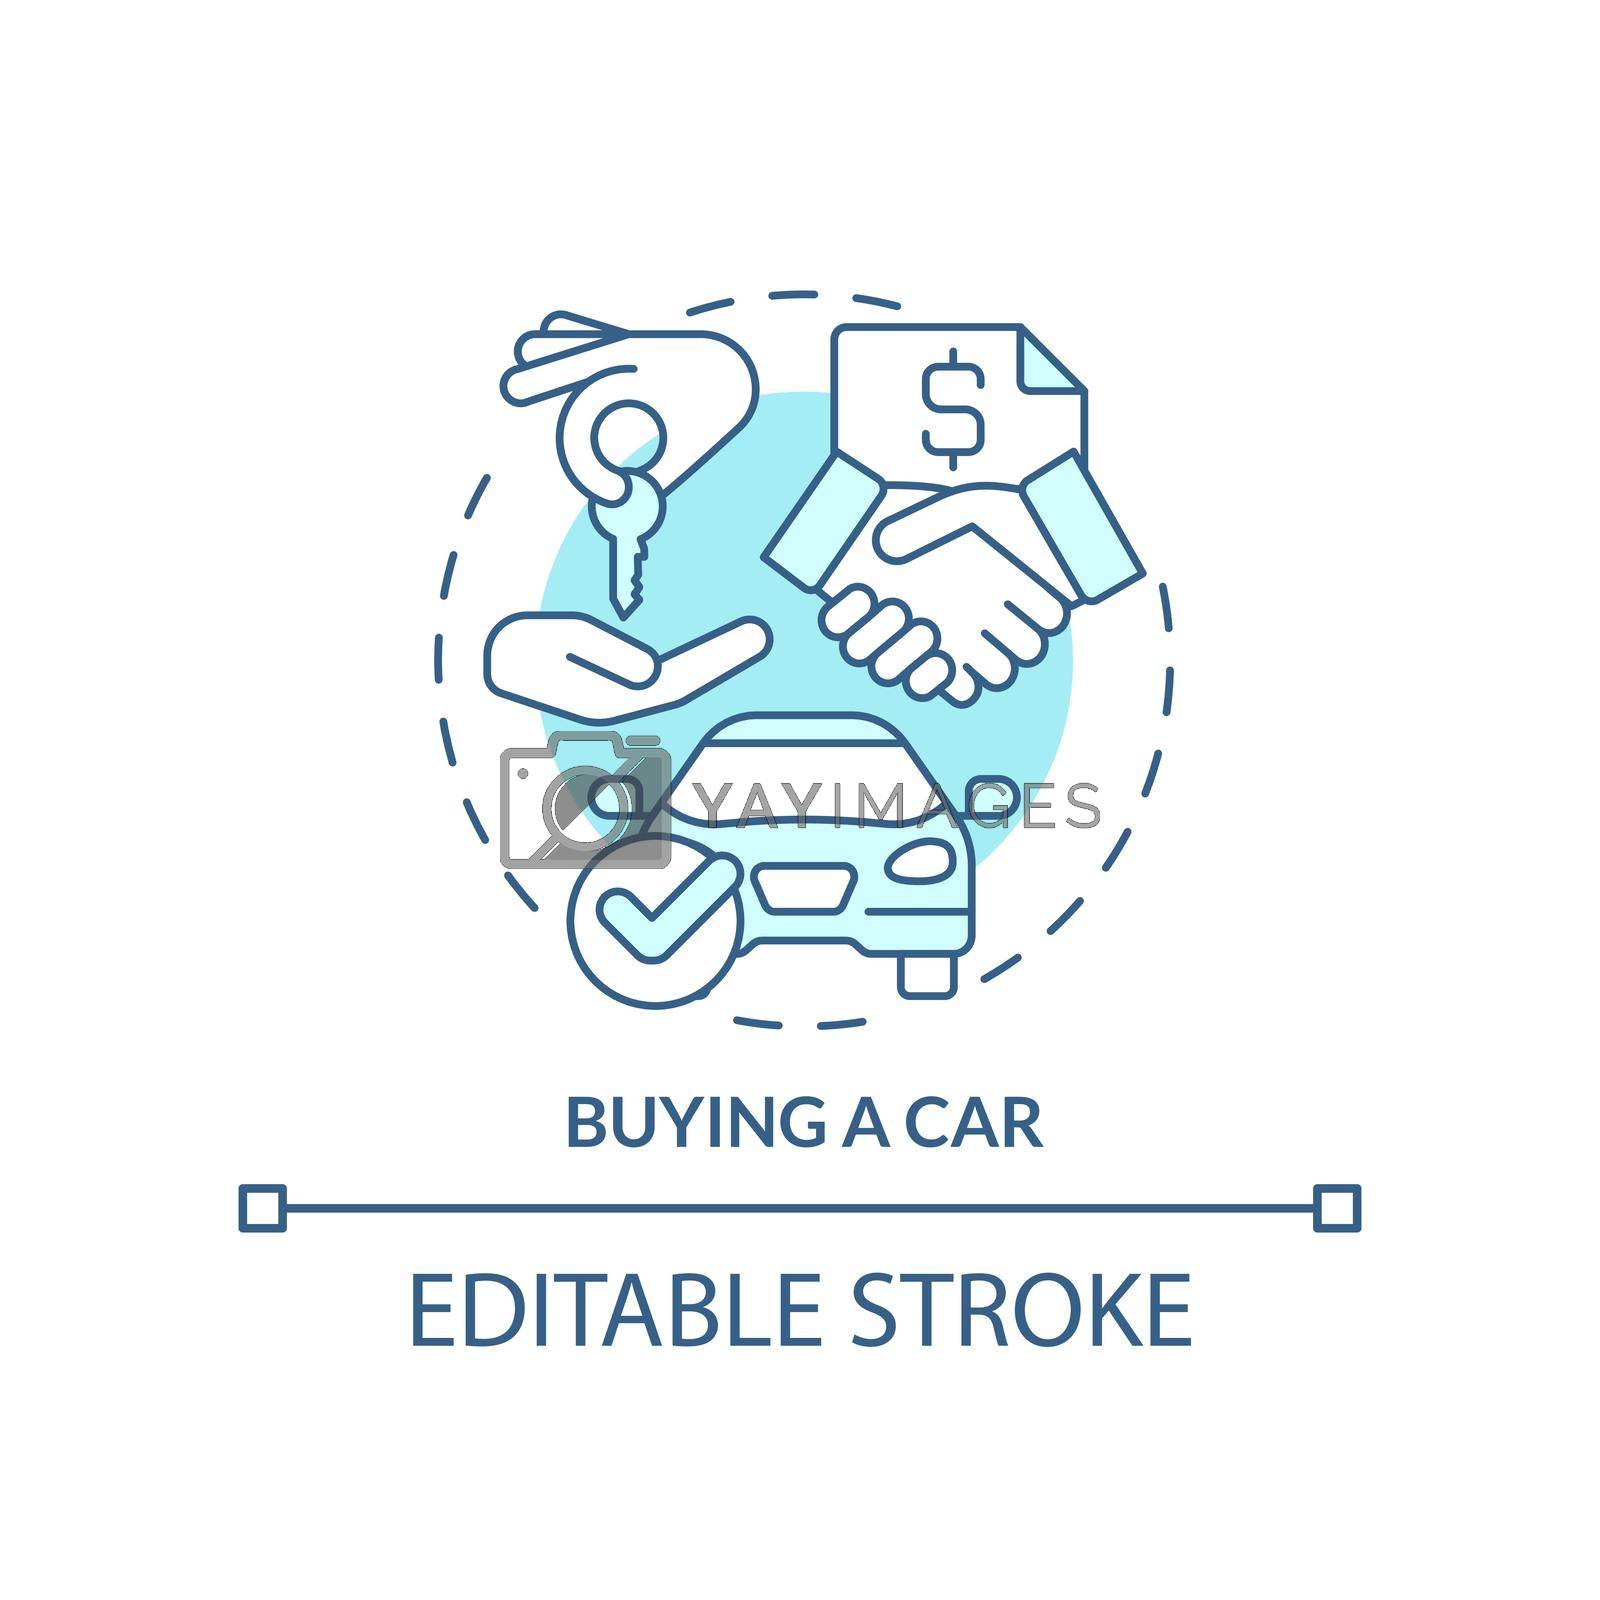 Royalty free image of Buying car turquoise concept icon by bsd